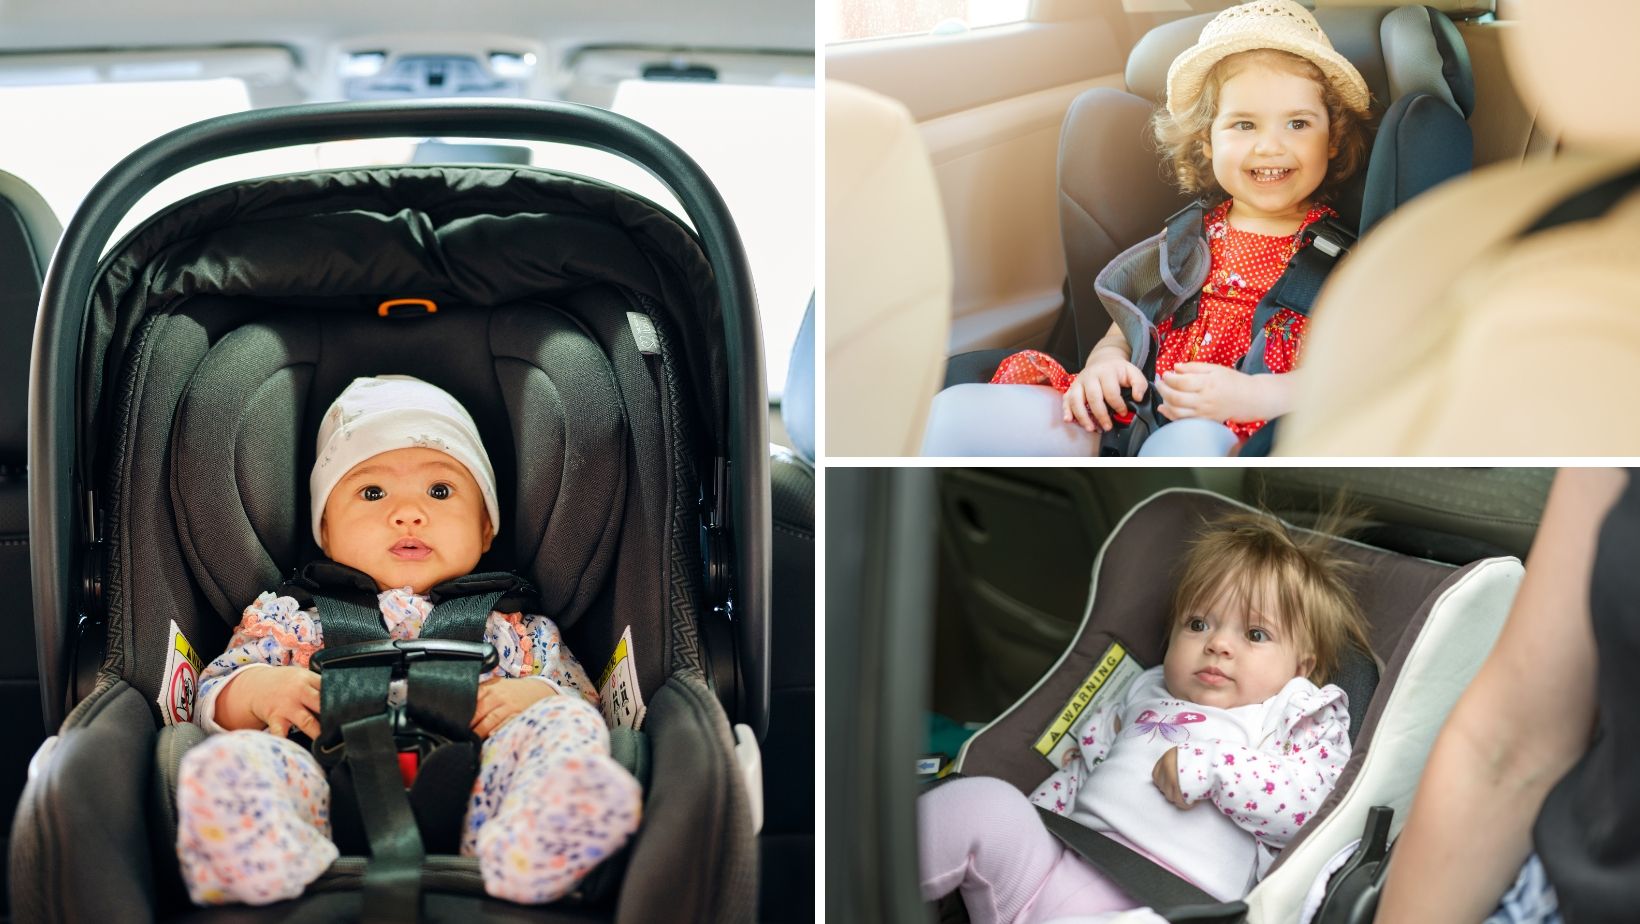 Three babies seated in different baby car seats.